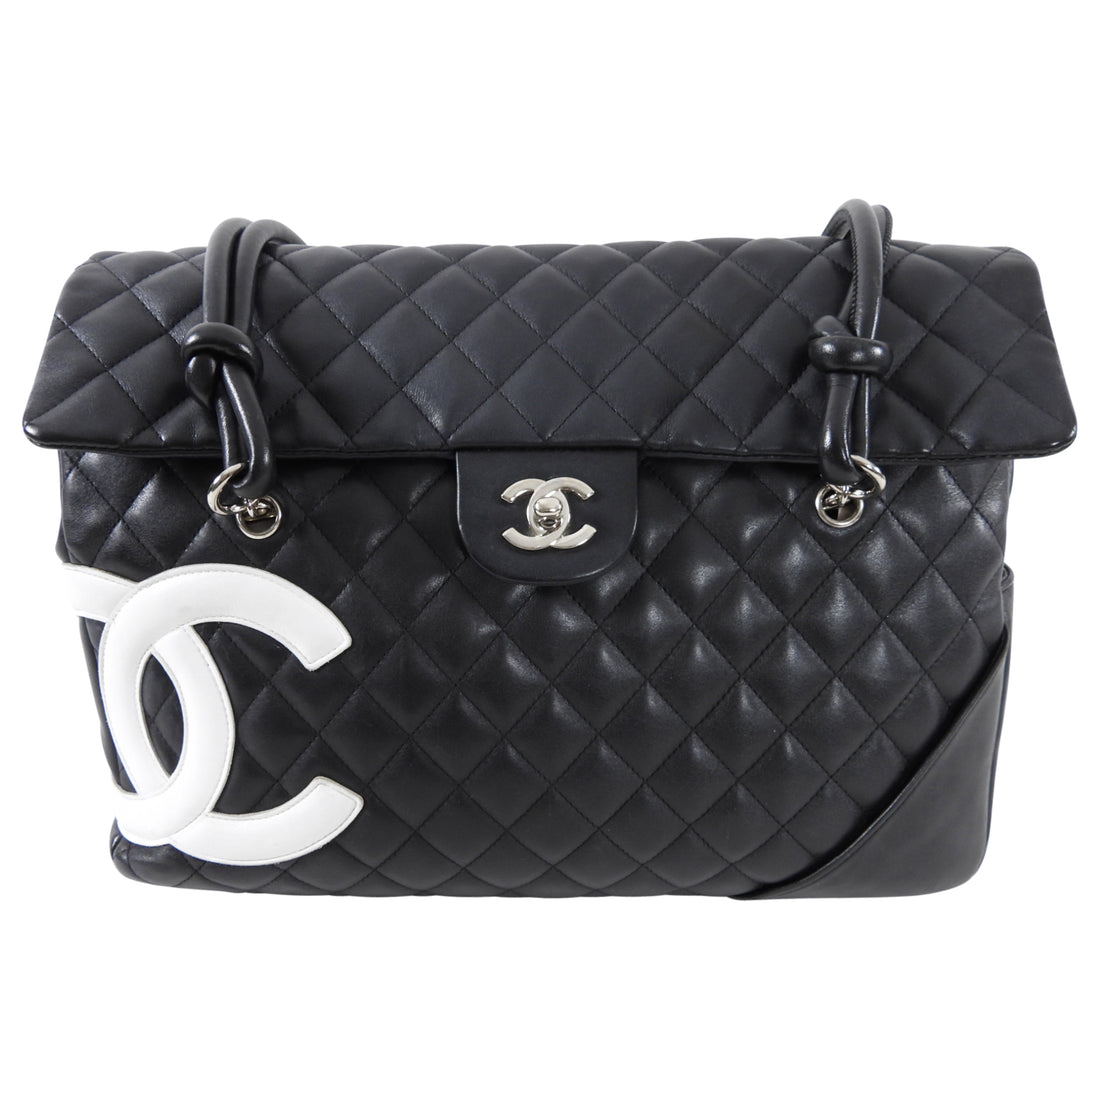 Chanel - Authenticated Cambon Handbag - Leather Black Plain for Women, Very Good Condition